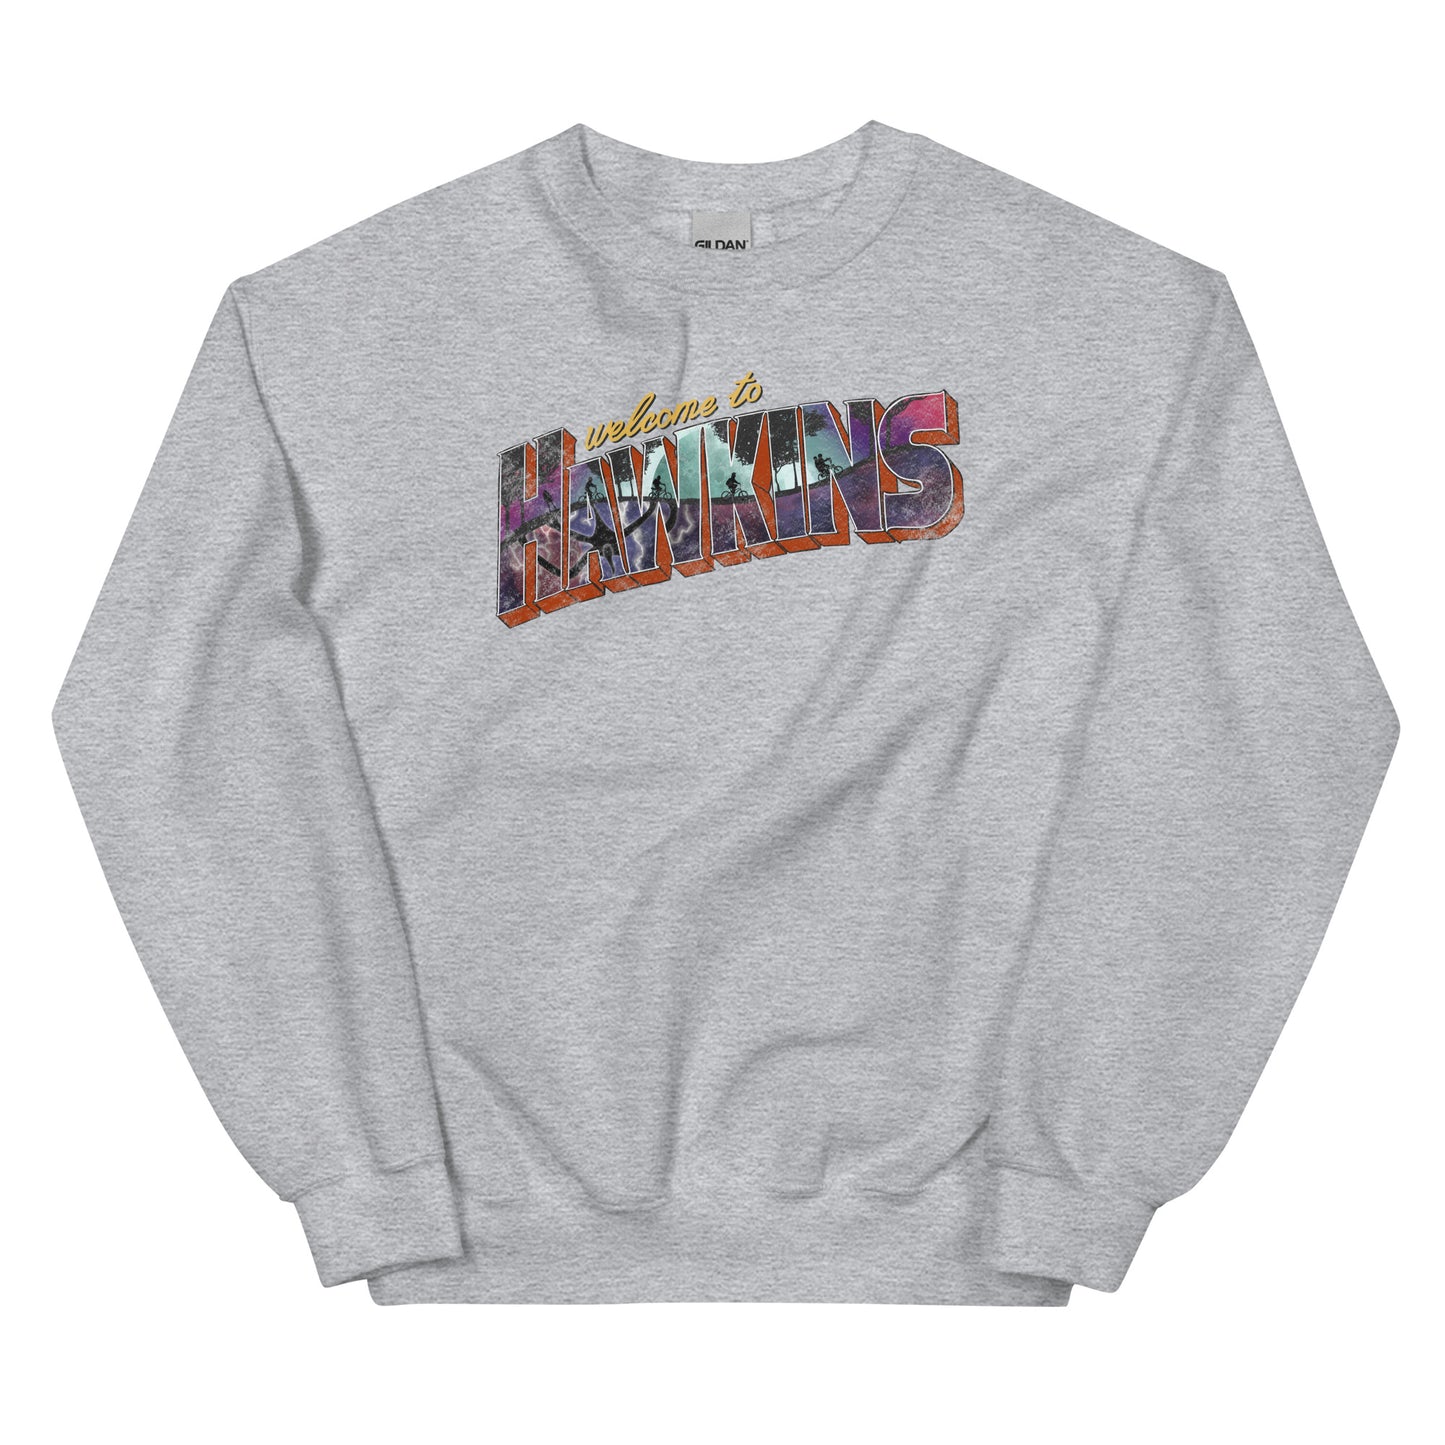 Welcome to Hawkins Sweater